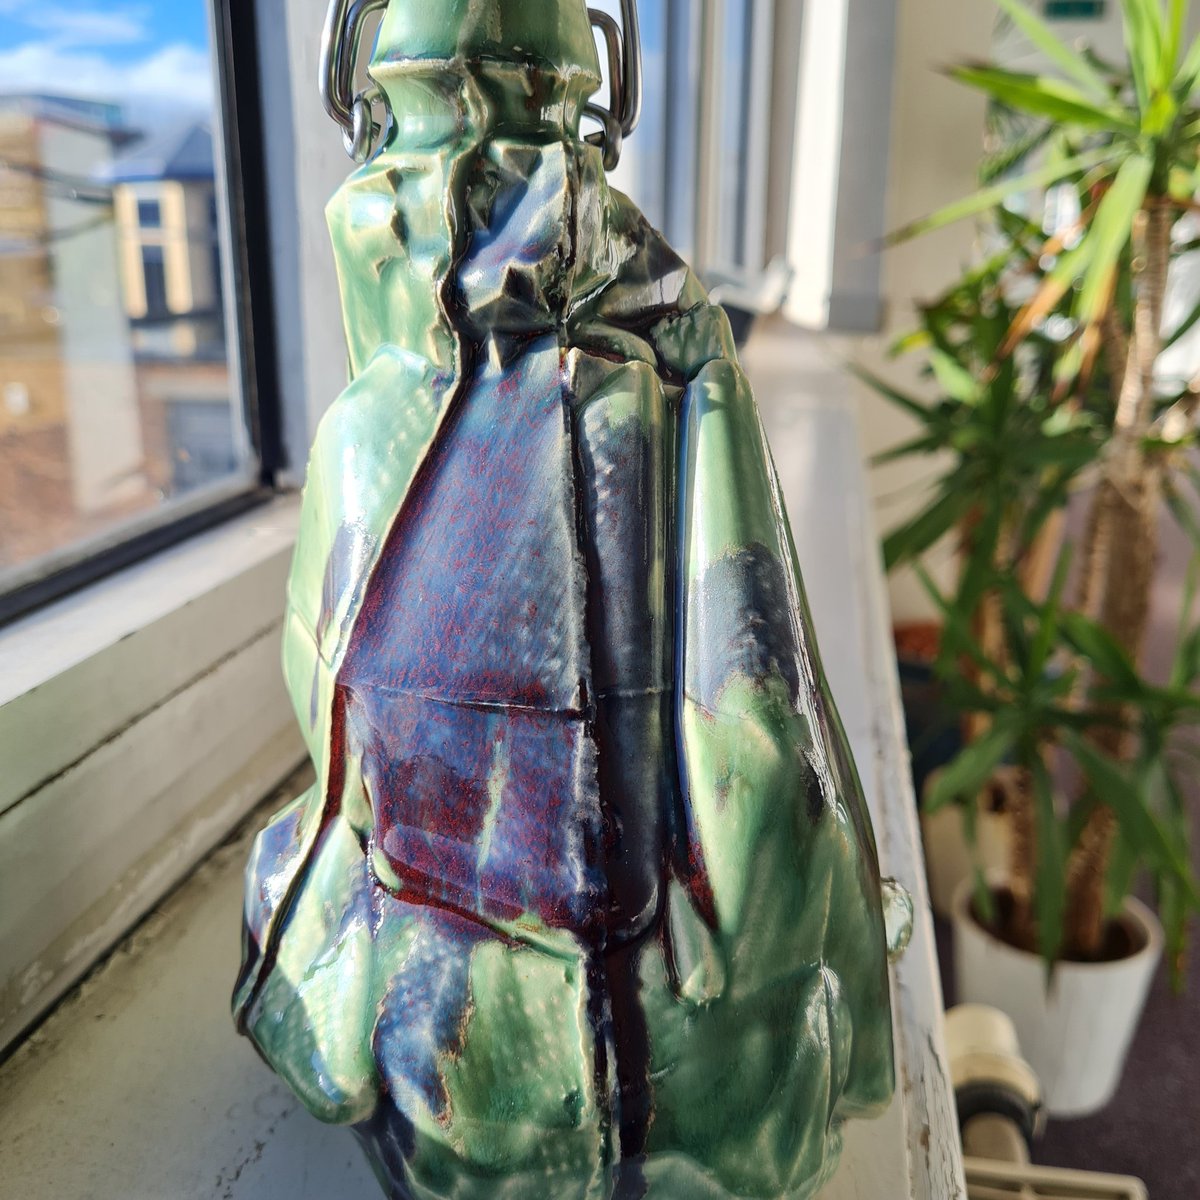 Here is the first of my Gong Bottles out of the kiln this afternoon. 

It was designed in virtual reality as part of the #DistanceProject with @AppliedArtsScot